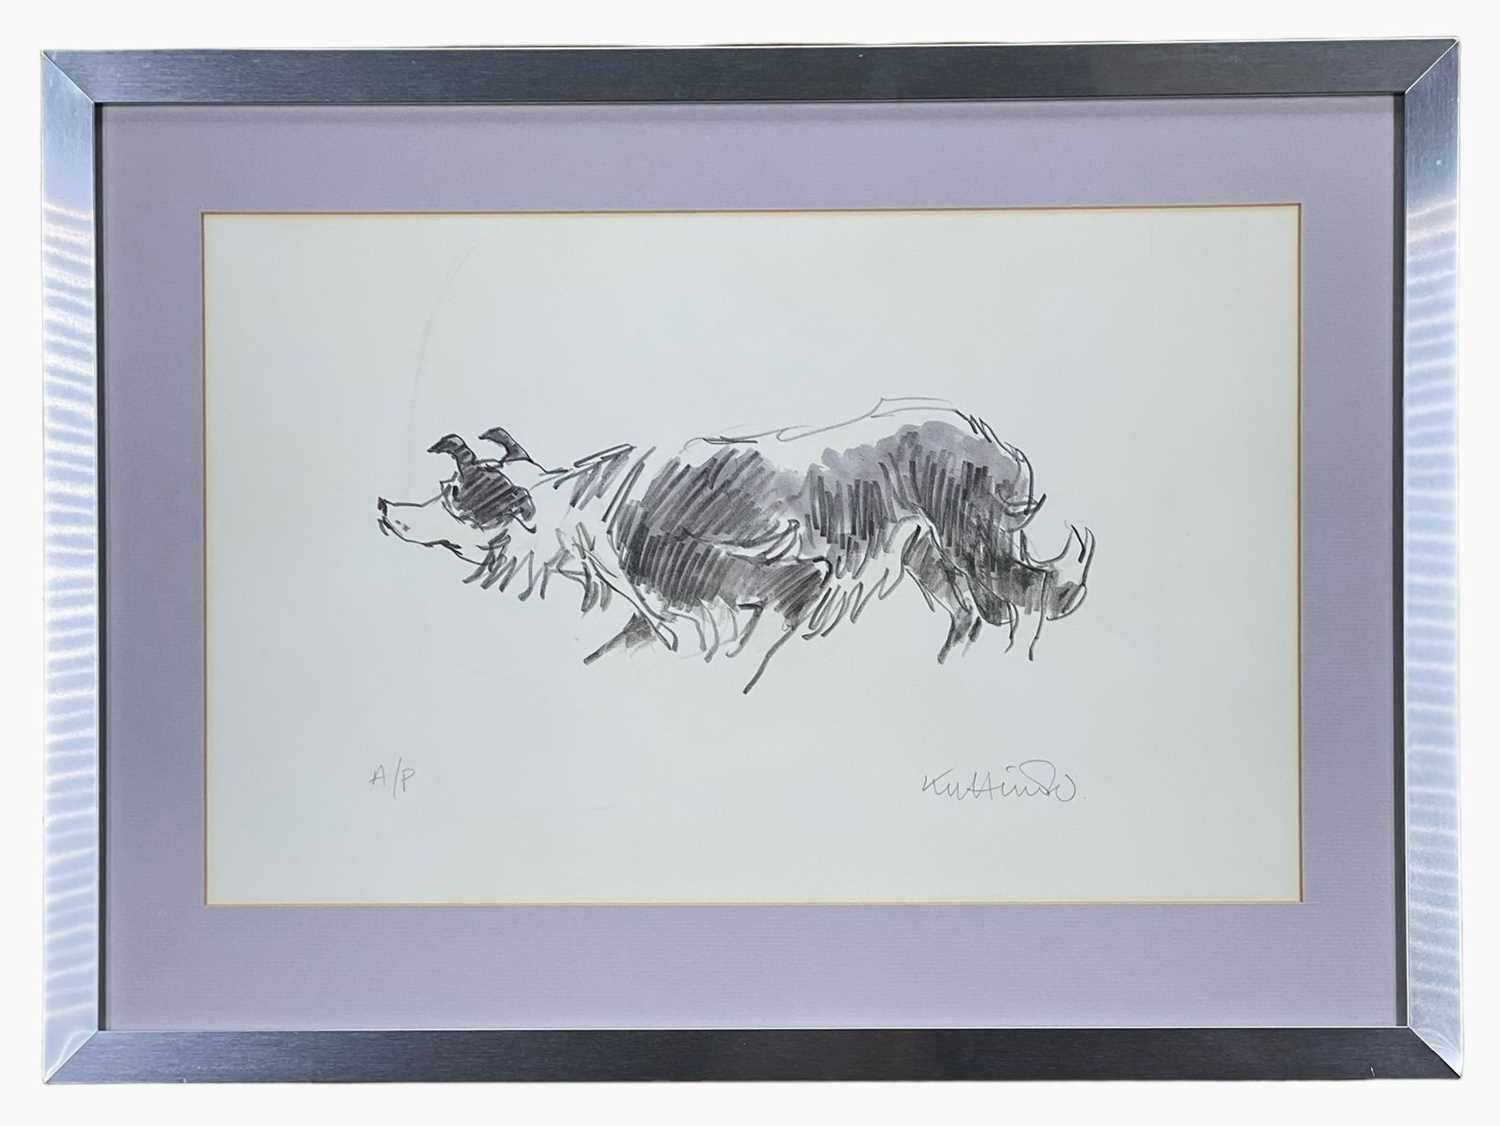 ‡ KYFFIN WILLIAMS RA artist's proof lithograph - Mott the sheepdog, signed in pencil, 30 x 40cms - Image 2 of 2